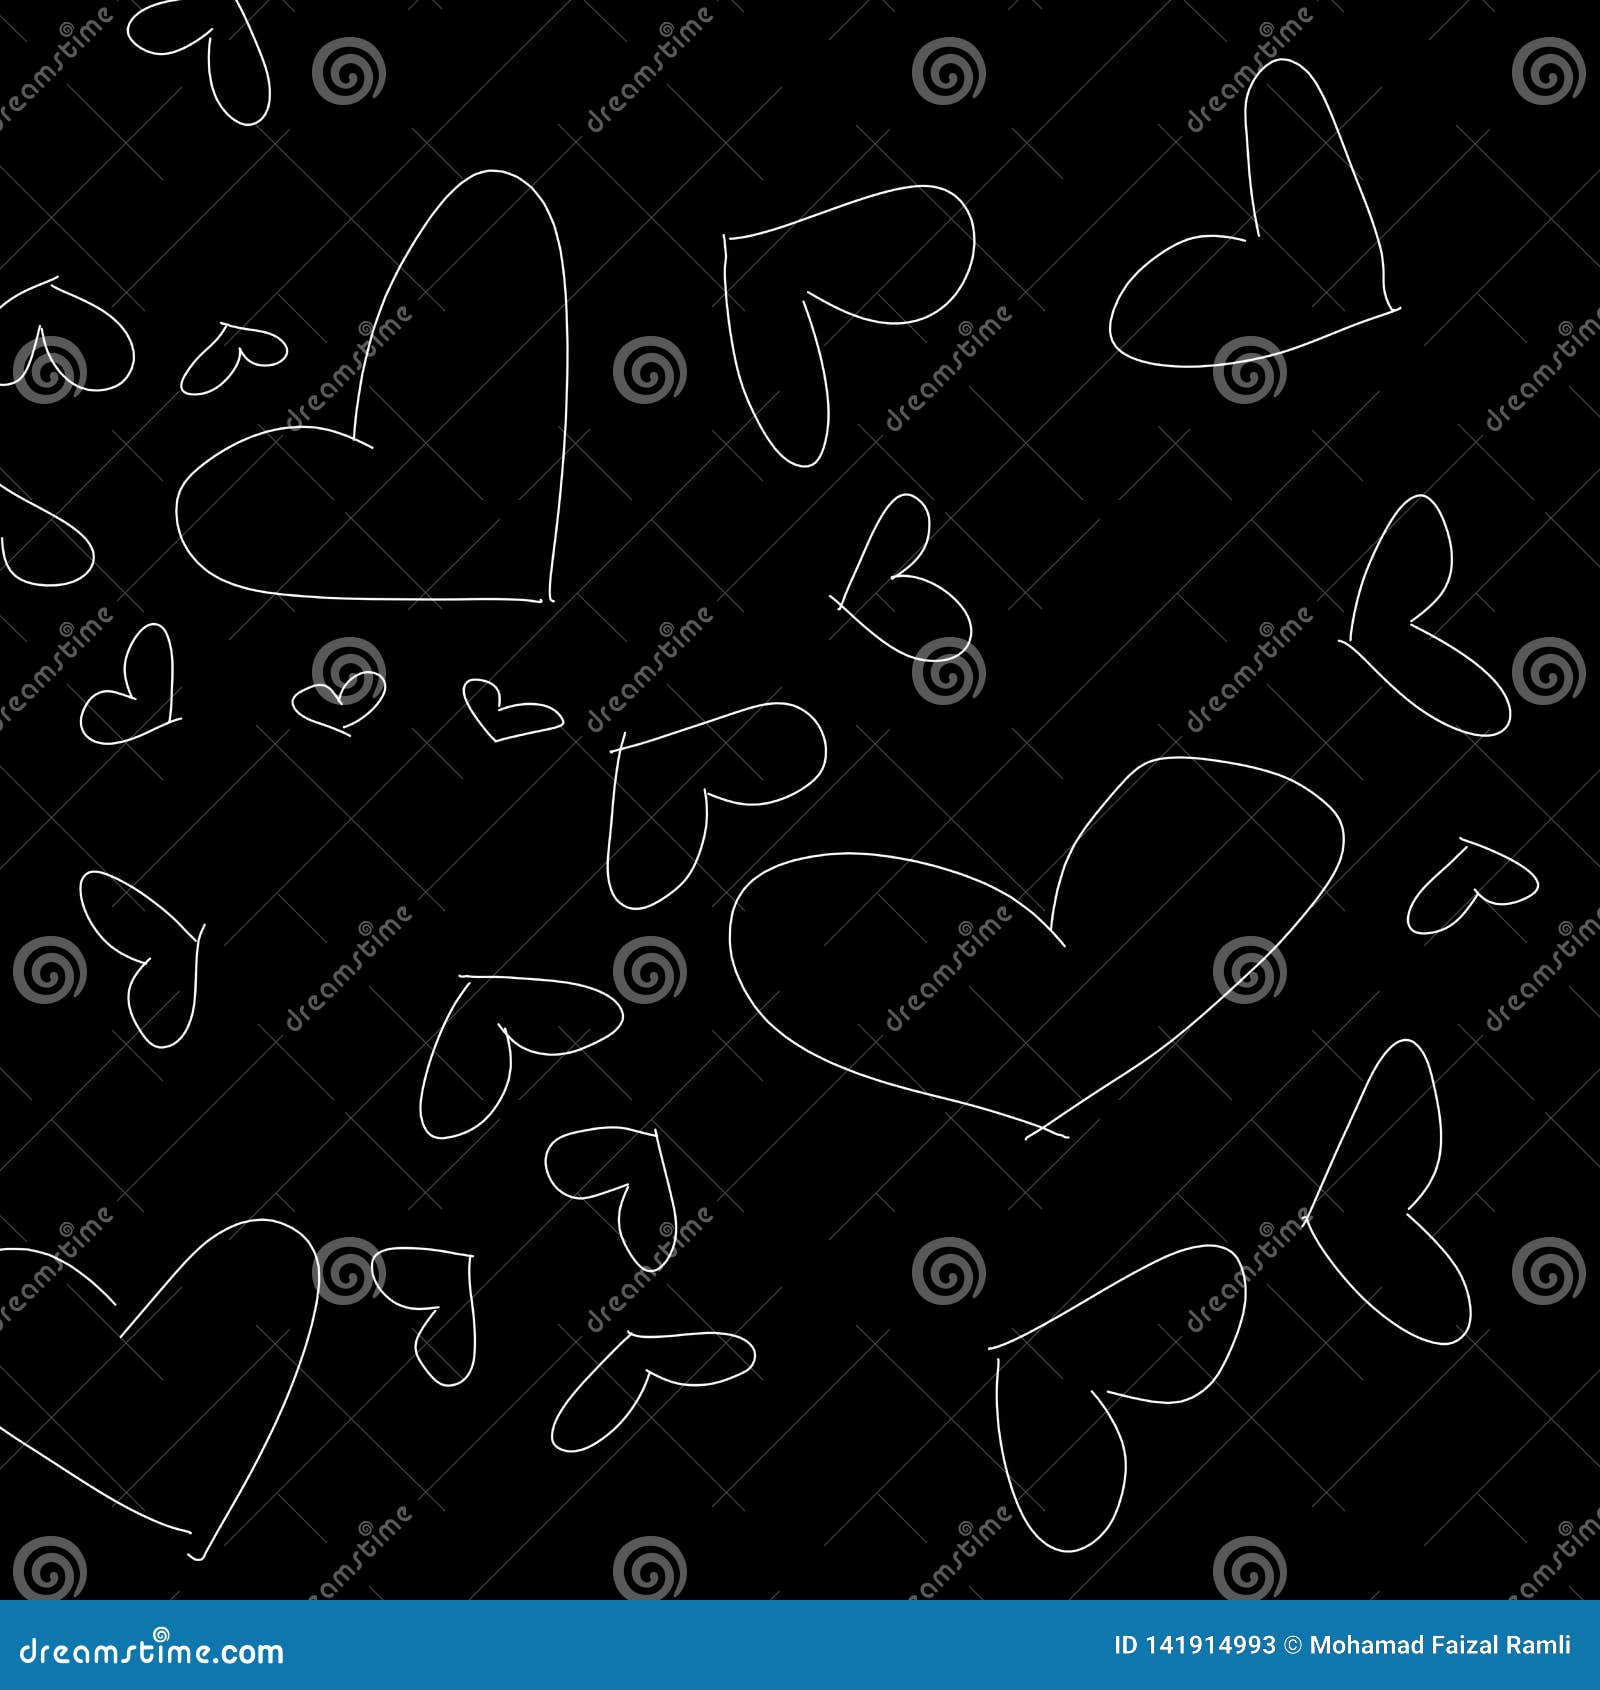 Abstract Black and White Love Pattern As Illustration Background and  Wallpaper Stock Illustration - Illustration of backdrop, decorative:  141914993